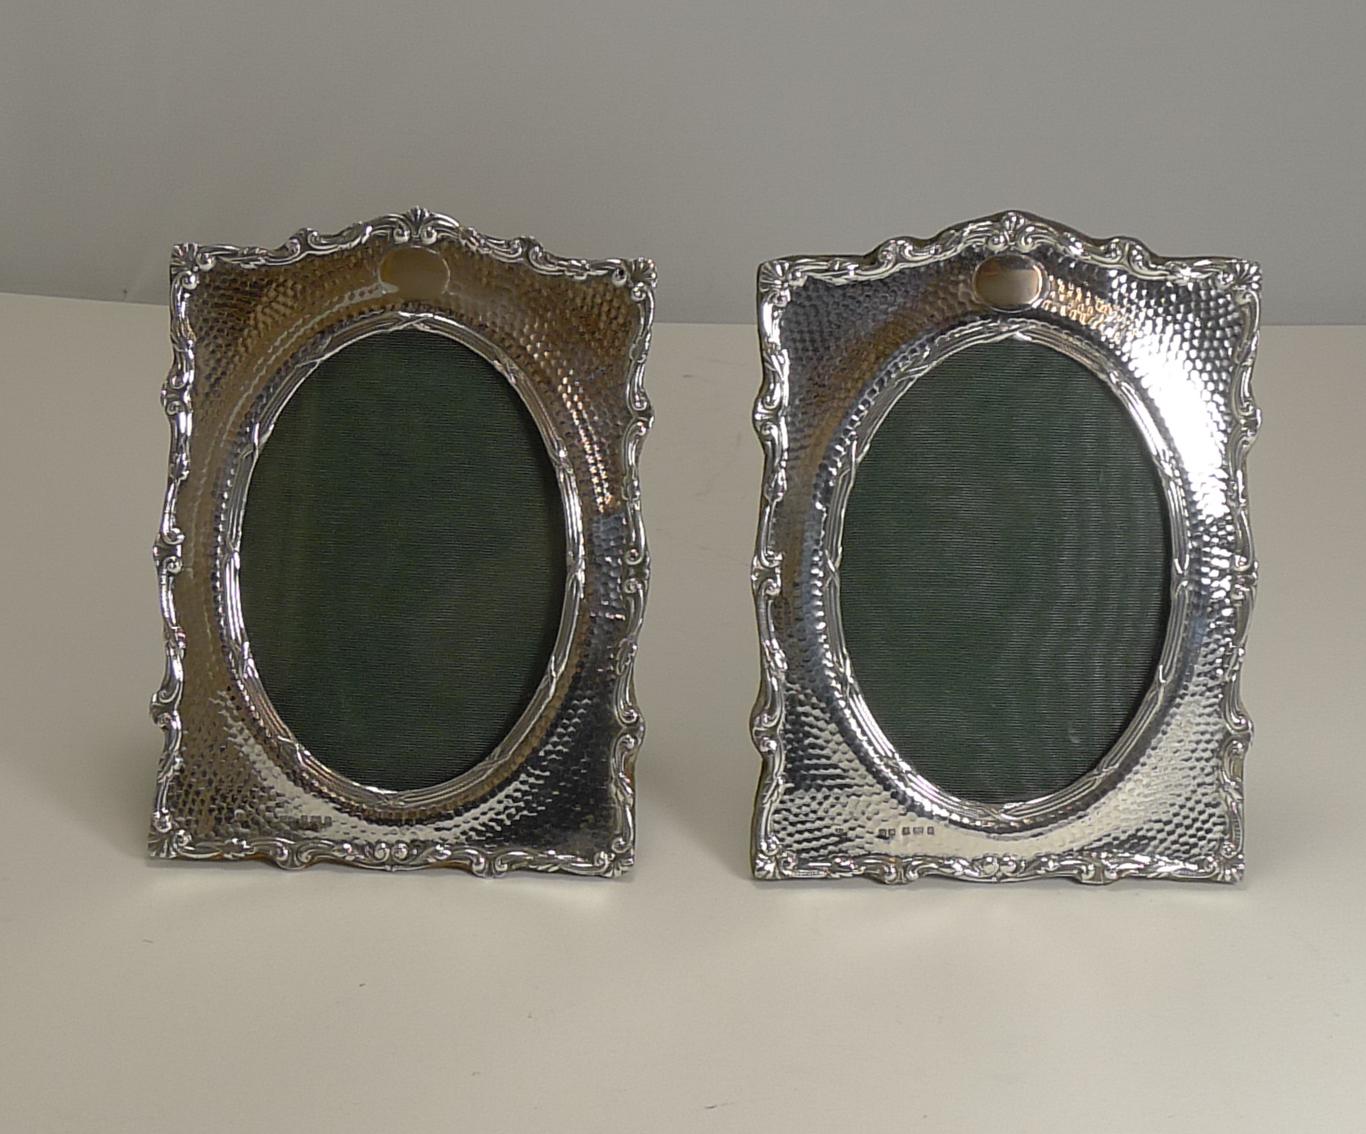 Edwardian Pair of Antique English Sterling Silver Photograph Frames by Henry Matthews